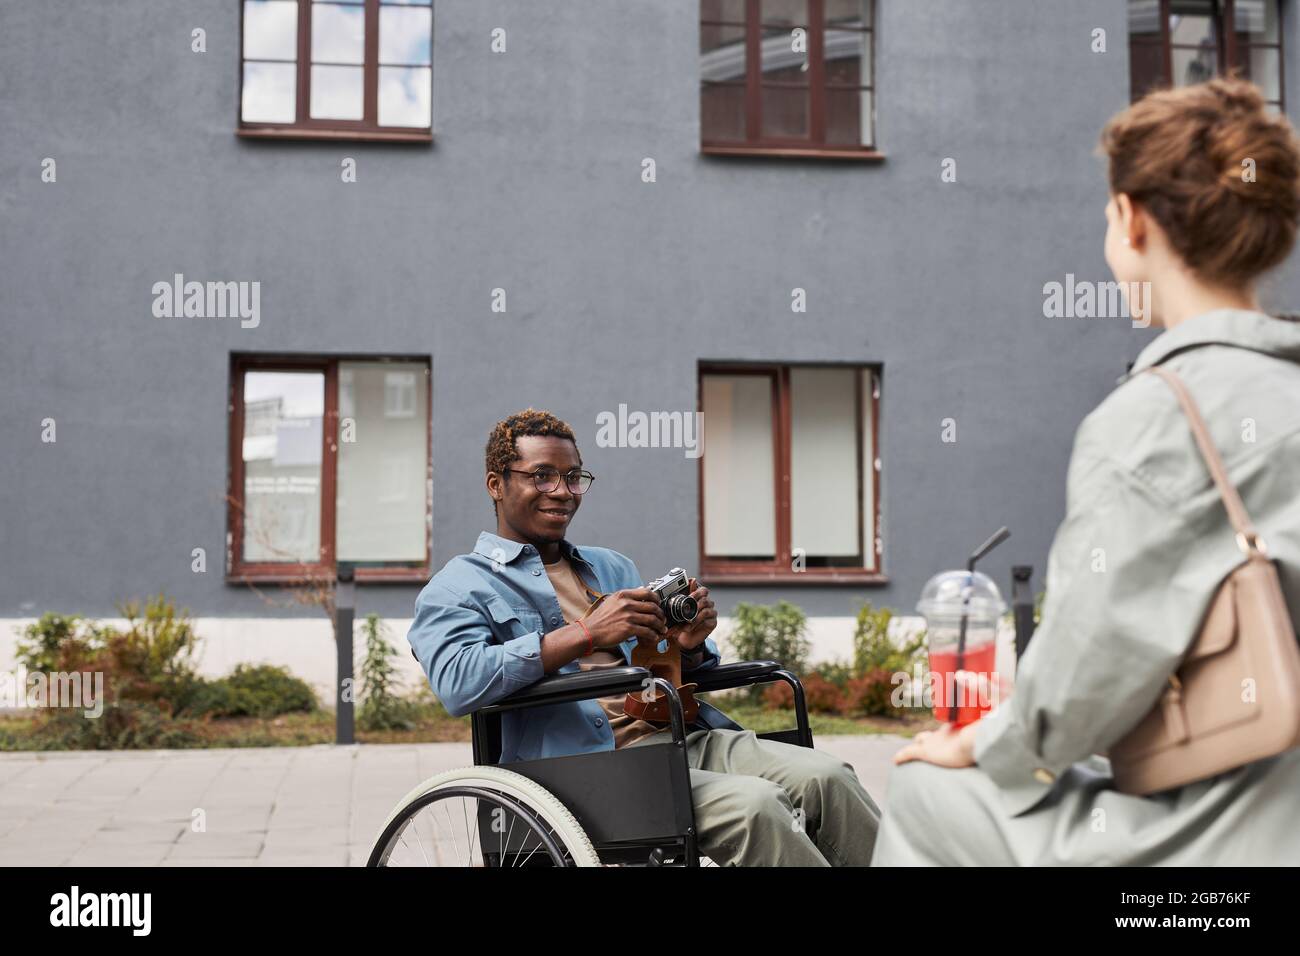 Smiling young handicapped African-American man in glasses sitting in wheelchair and photographing woman outdoors Stock Photo